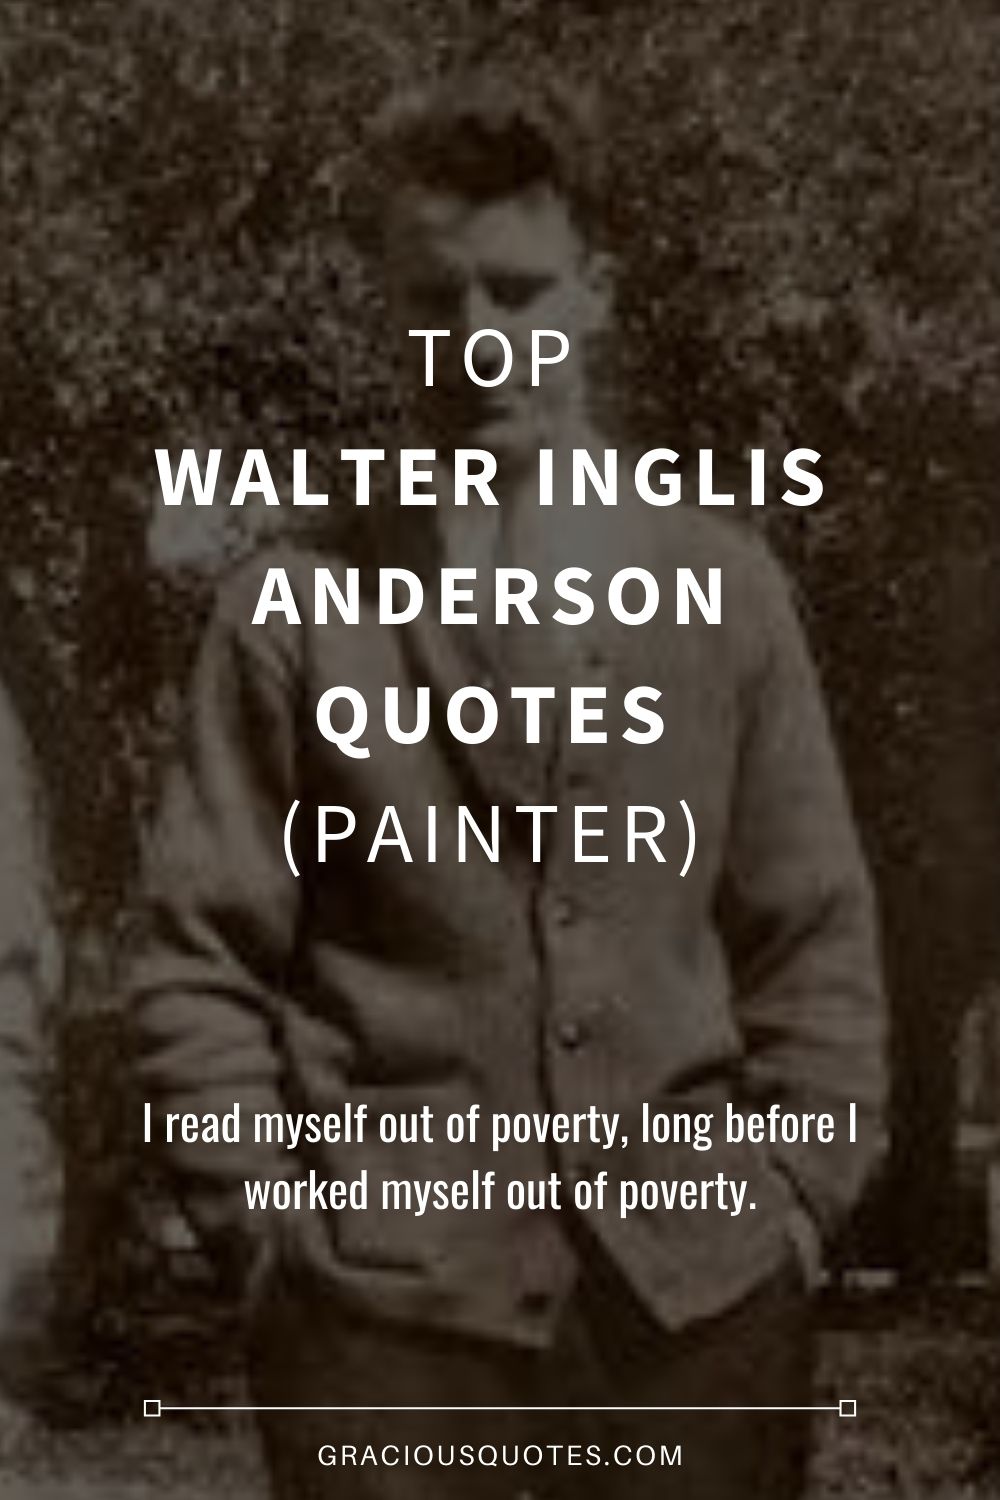 Top Walter Inglis Anderson Quotes (PAINTER) - Gracious Quotes